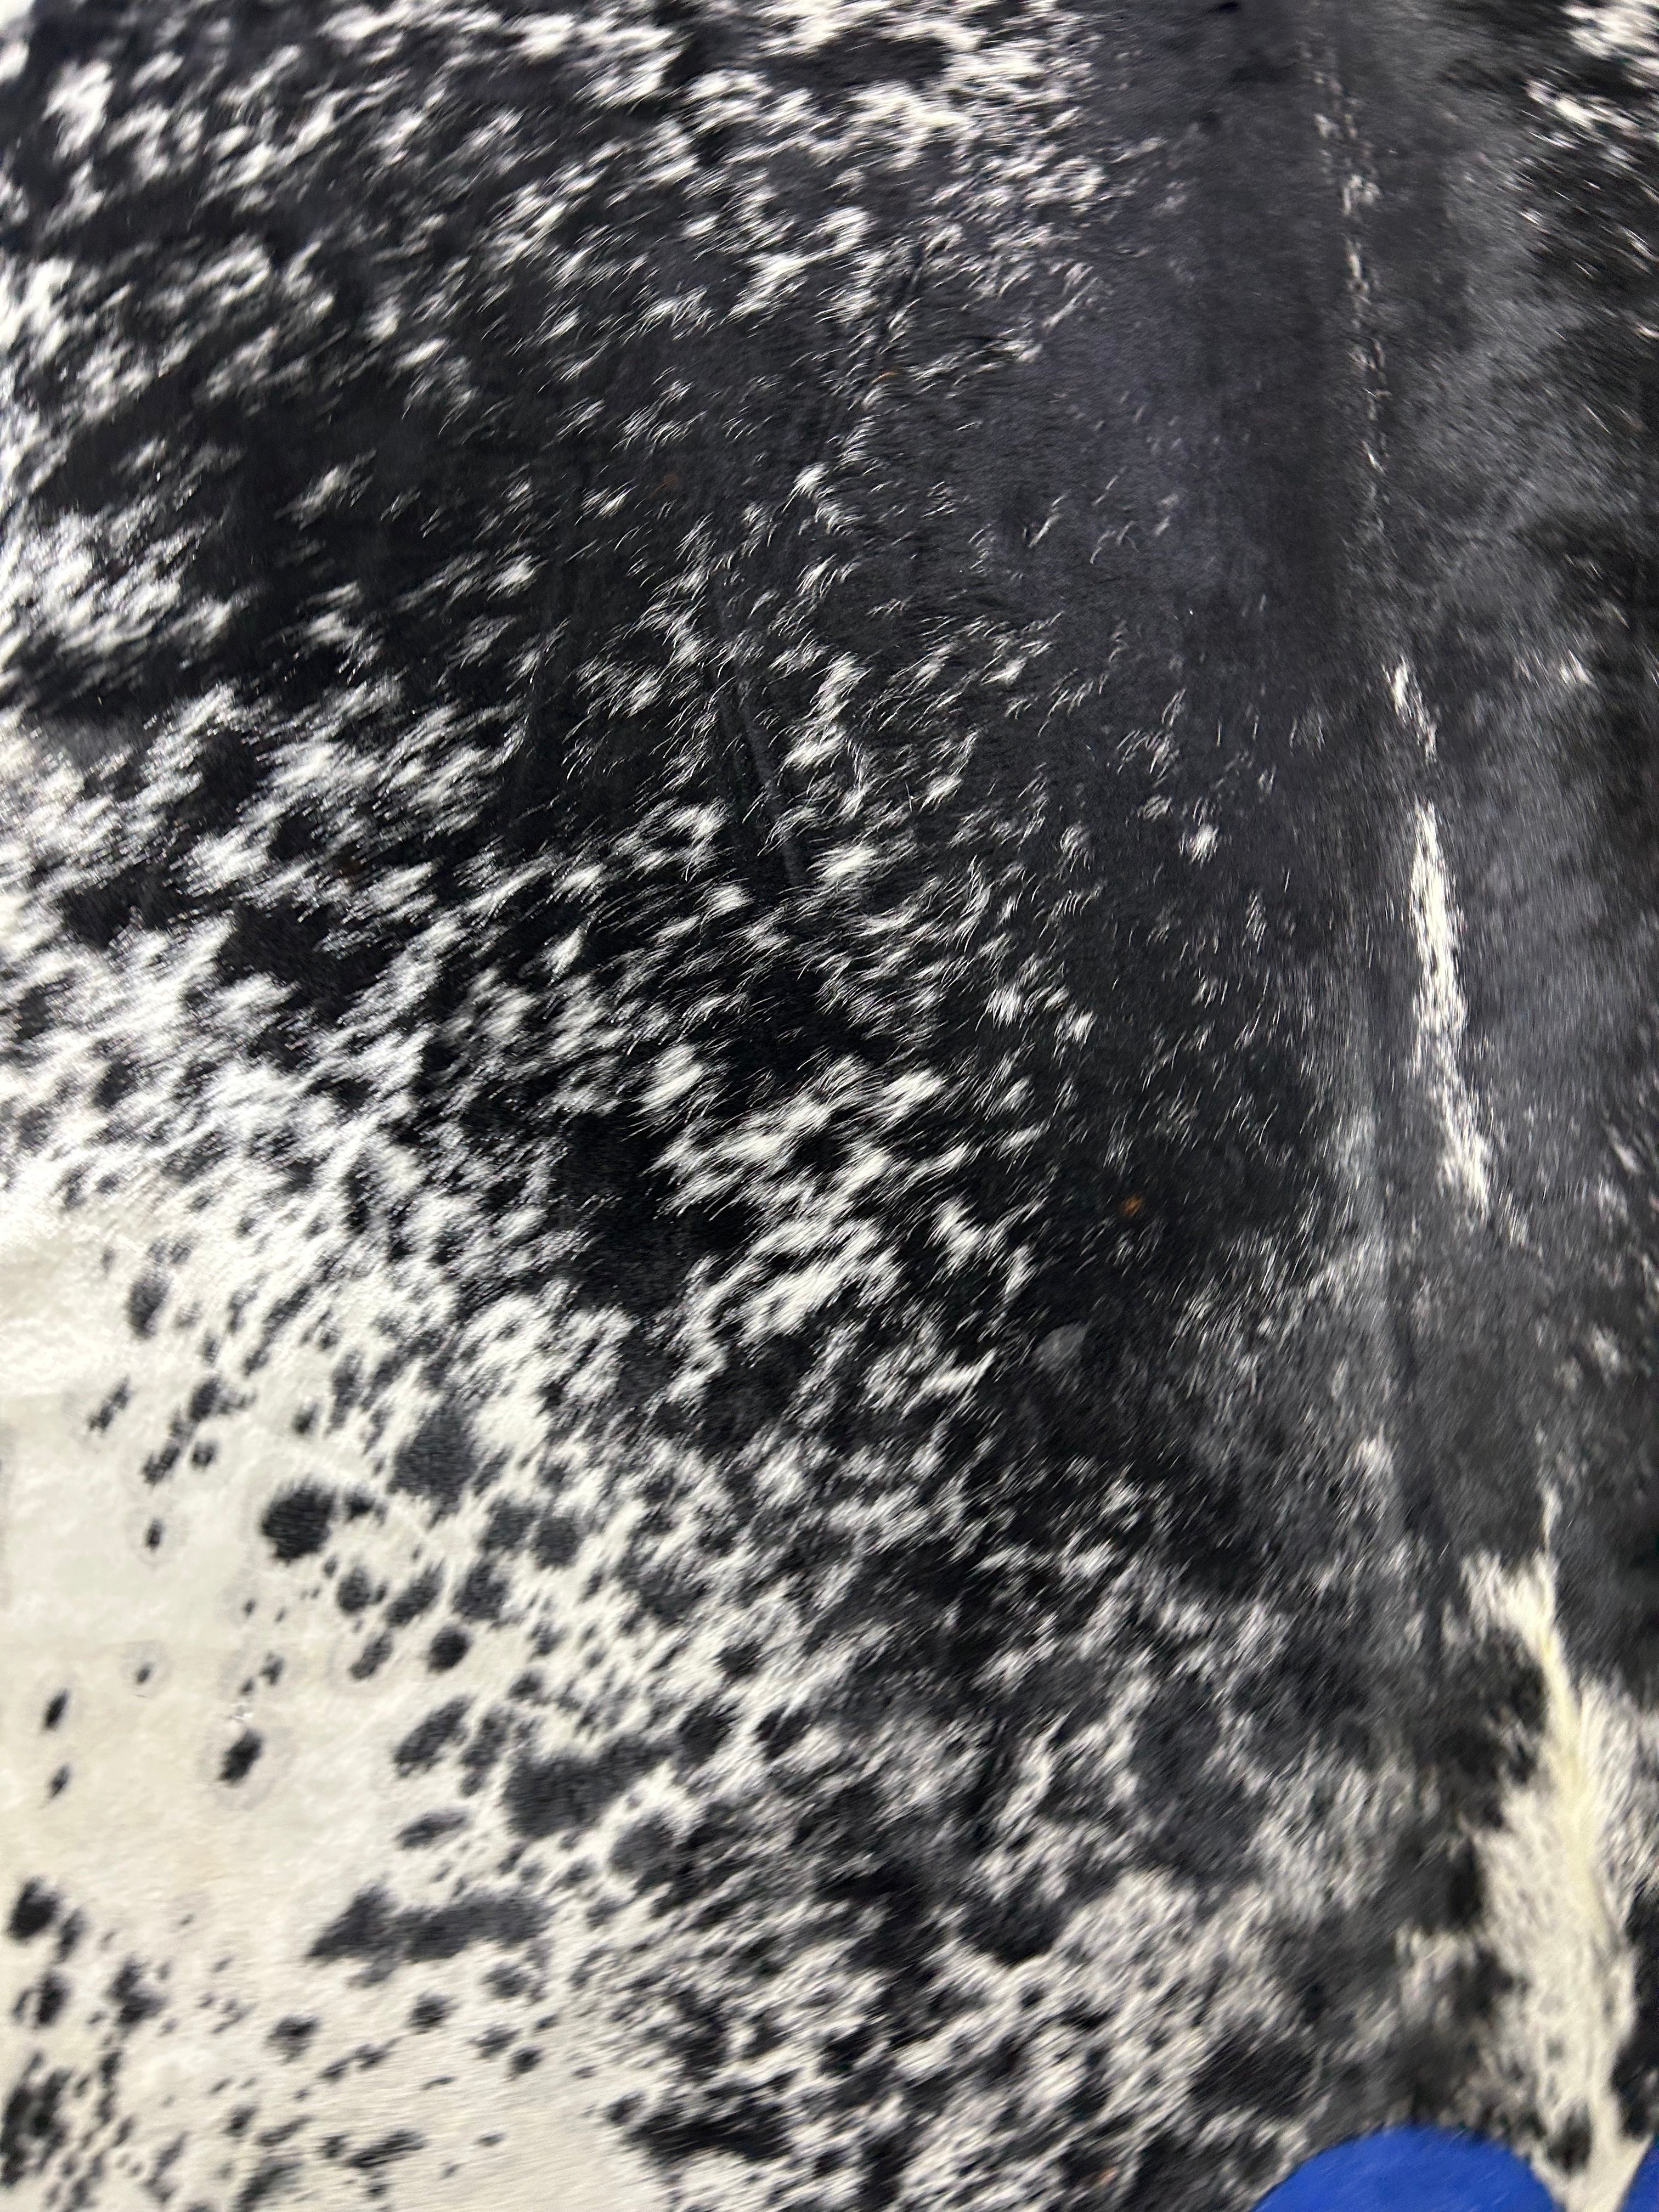 Black & White Speckled Cowhide Rug Size: 7.5x6 feet C-1734